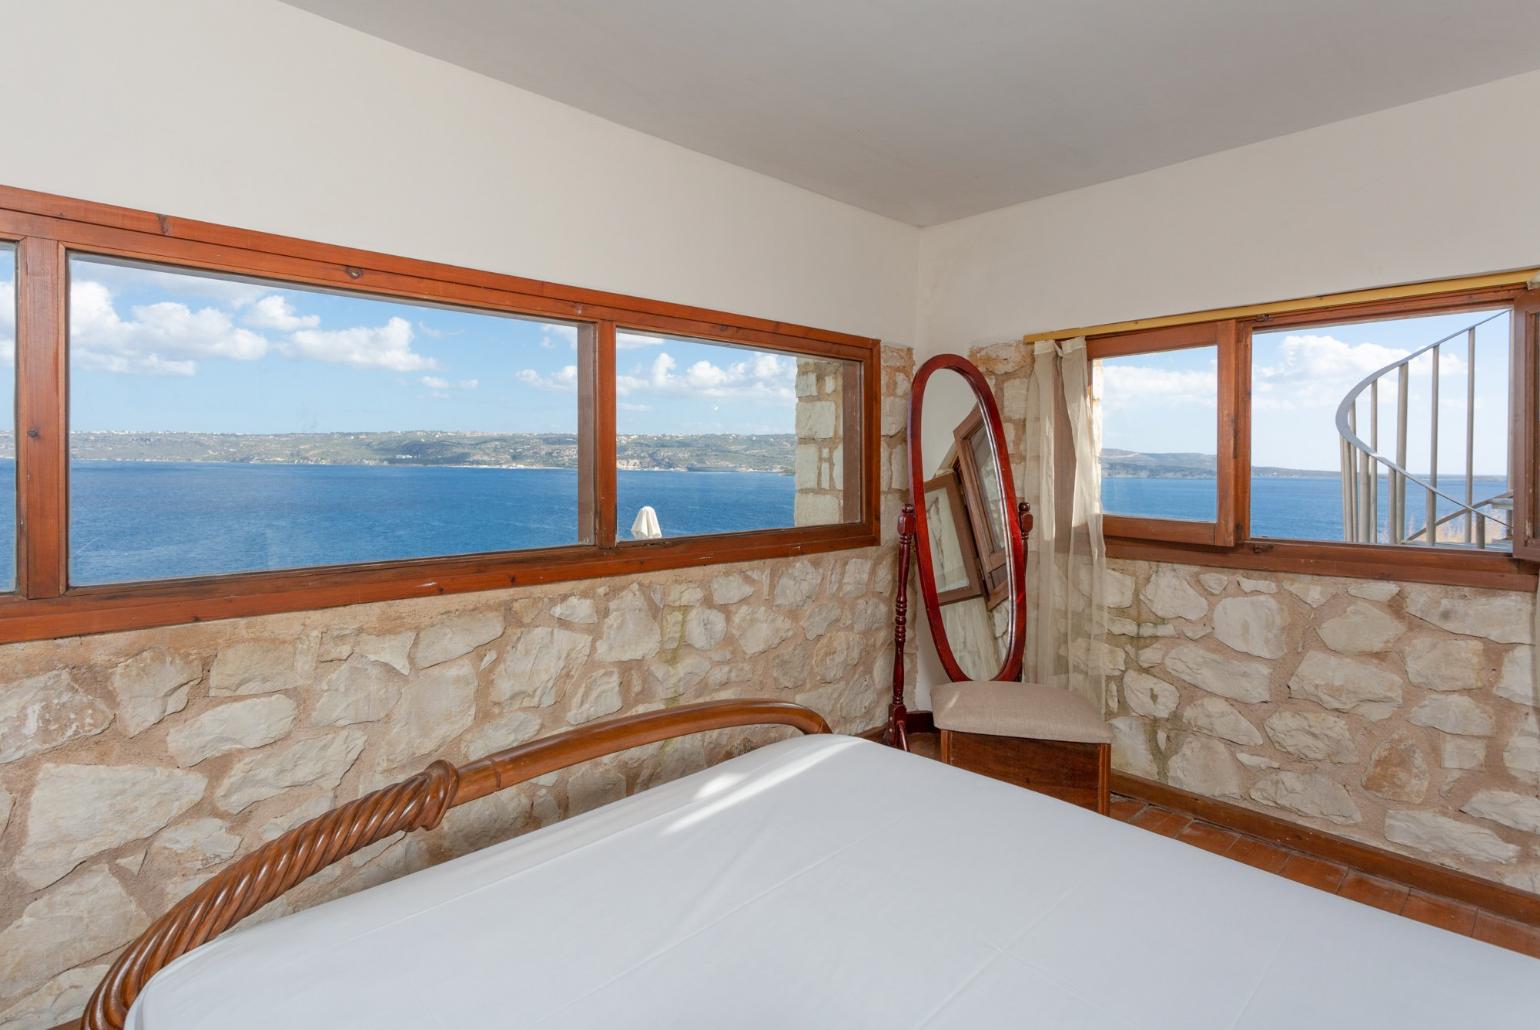 Double bedroom on mezzanine of self-contained apartment with panoramic sea views